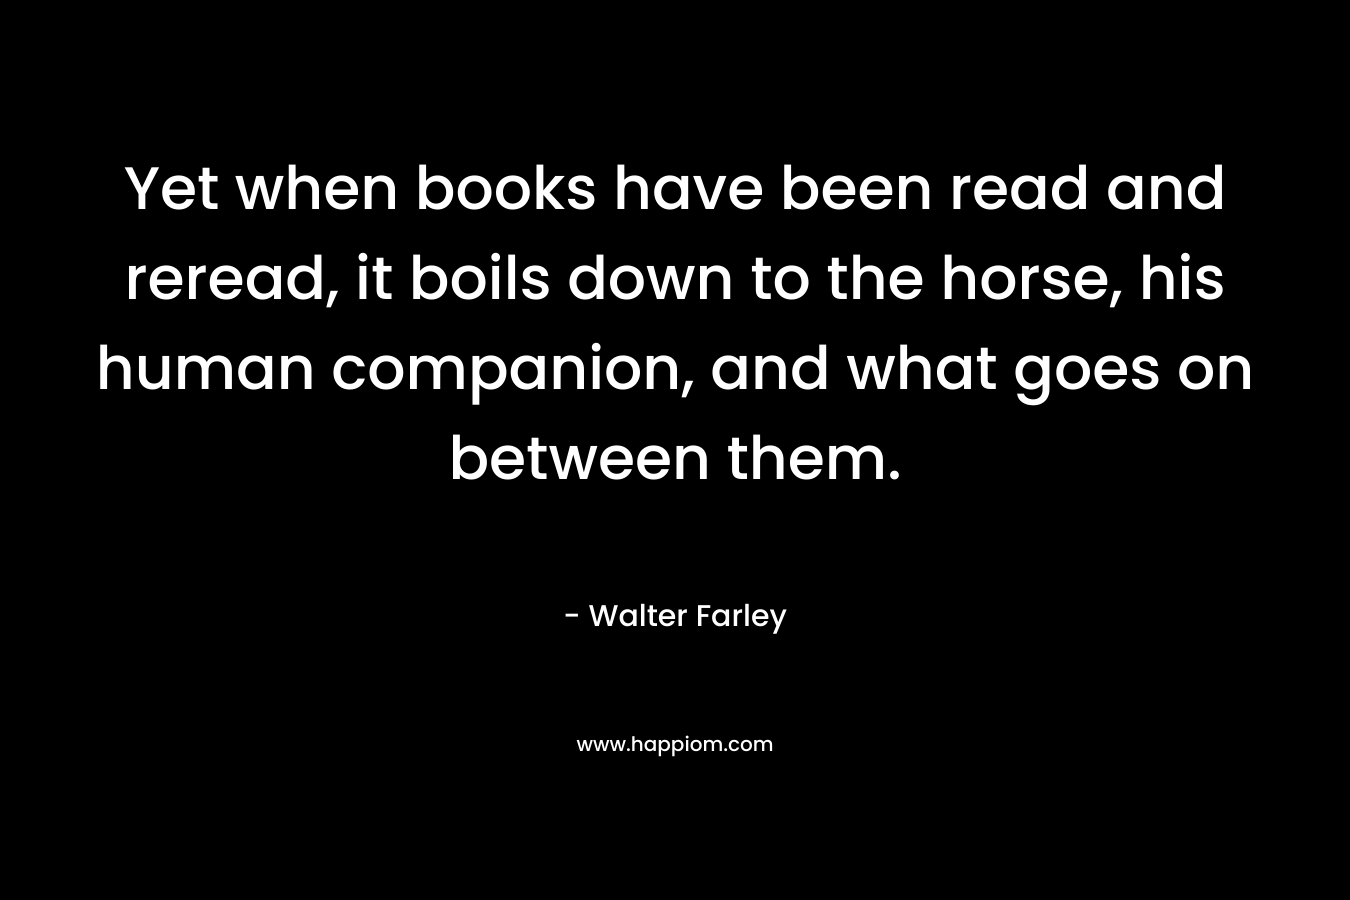 Yet when books have been read and reread, it boils down to the horse, his human companion, and what goes on between them. – Walter Farley